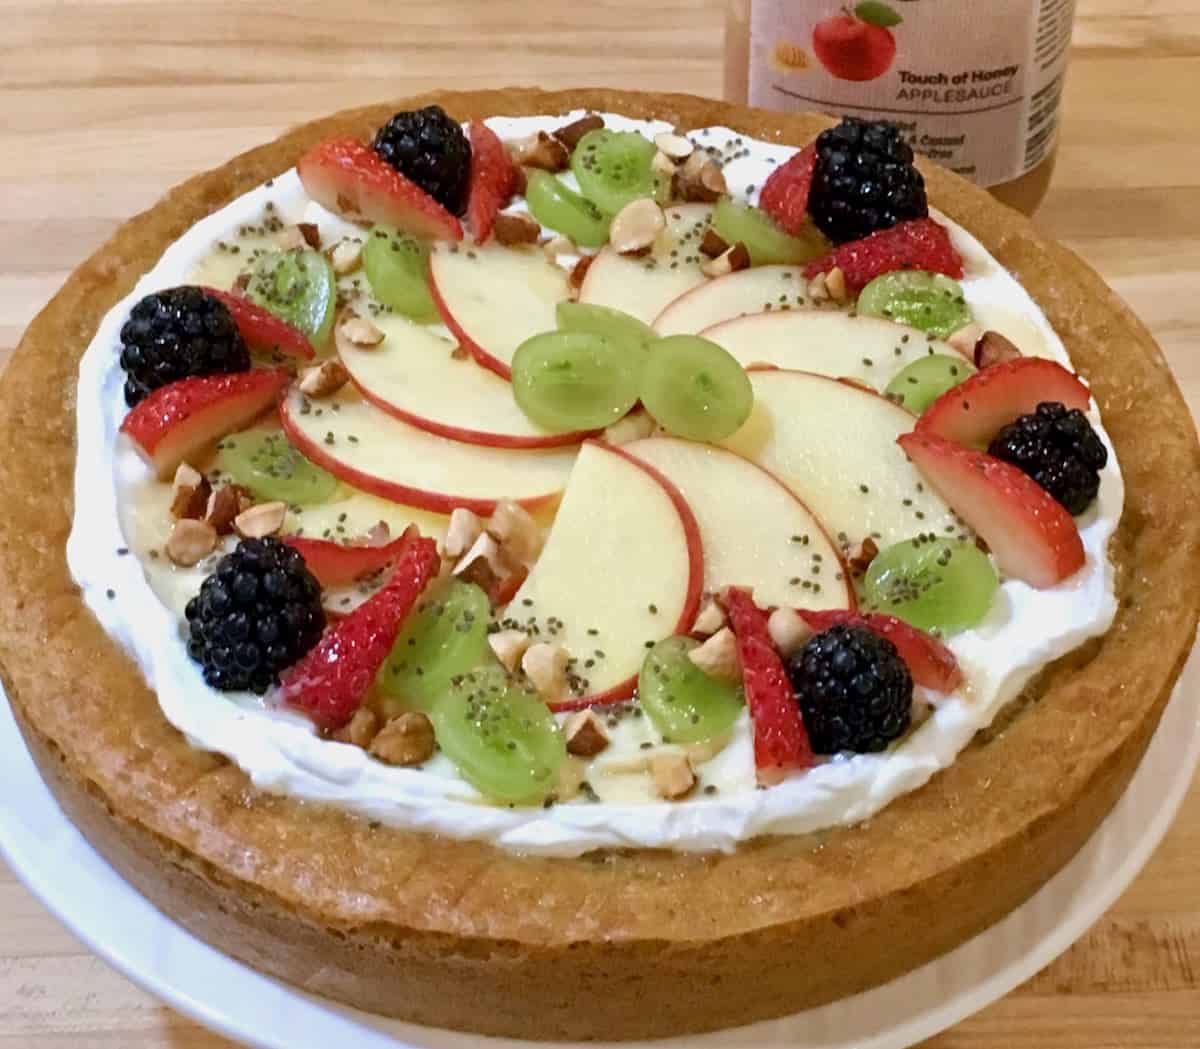 Fresh fruit topped cake made with applesauce.